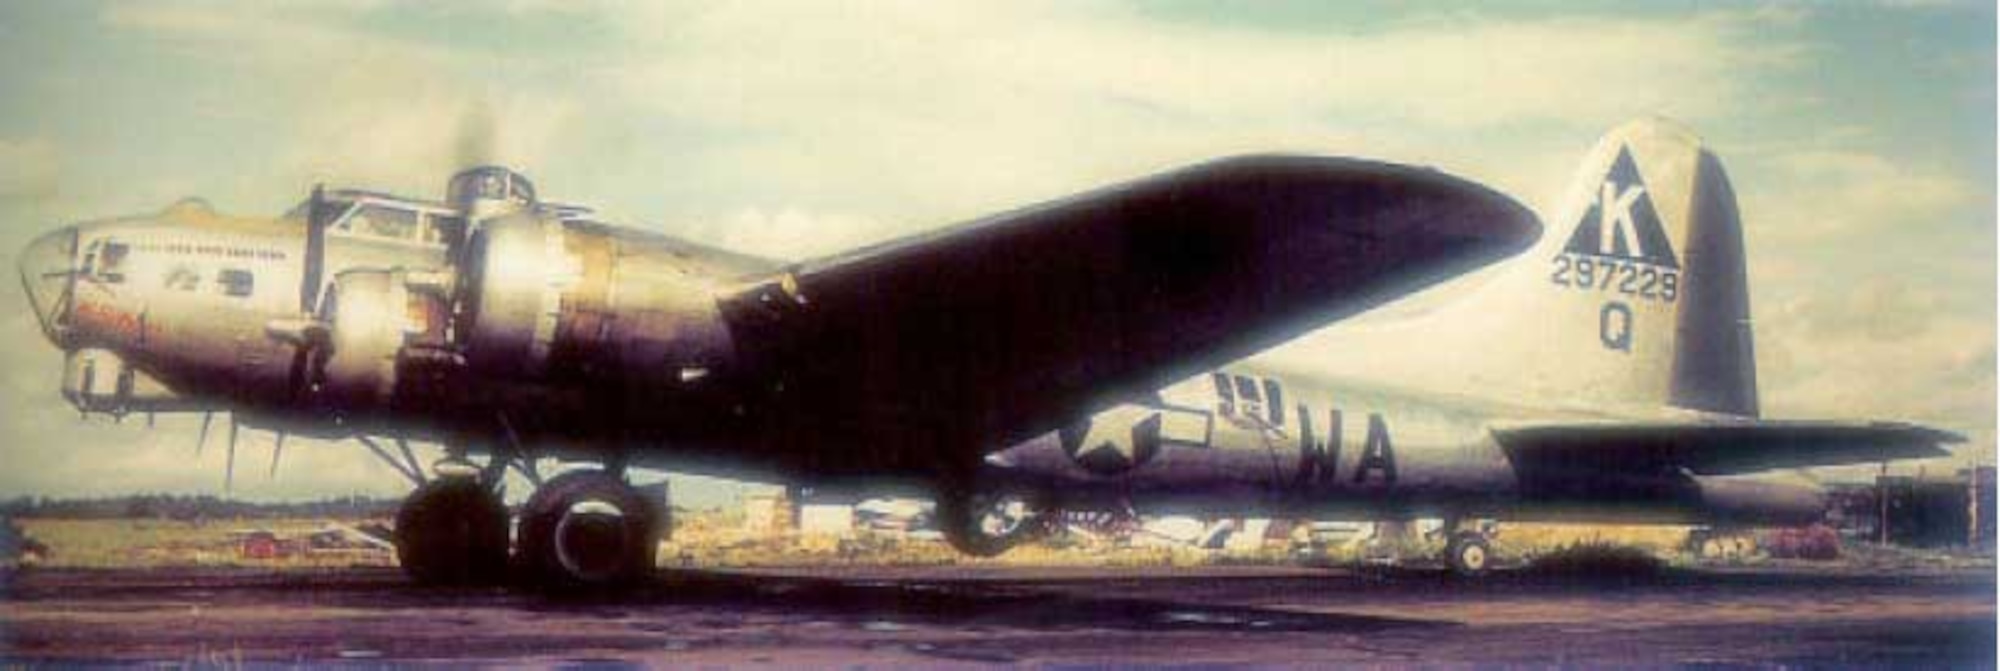 This painting of a B-17 Flying Fortress, like the one flown by Capt. Shawn Jensen's grandfather 2nd Lt. Harry Burdette in World War II against Nazi Germany, displays the 379th Bombardment Group's assigned code letter K painted in a triangle on the tail of the aircraft. The 379's planes were assigned the letter K and were known as the Triangle K Group according to the 379th Air Expeditionary Wing's heritage pamphlet. Today, B-52 Stratofortress' assigned to the 379th AEW continue that tradition with a Triangle K apainted on their fuselage. (Courtesy photo-Richard Burdette/Released)